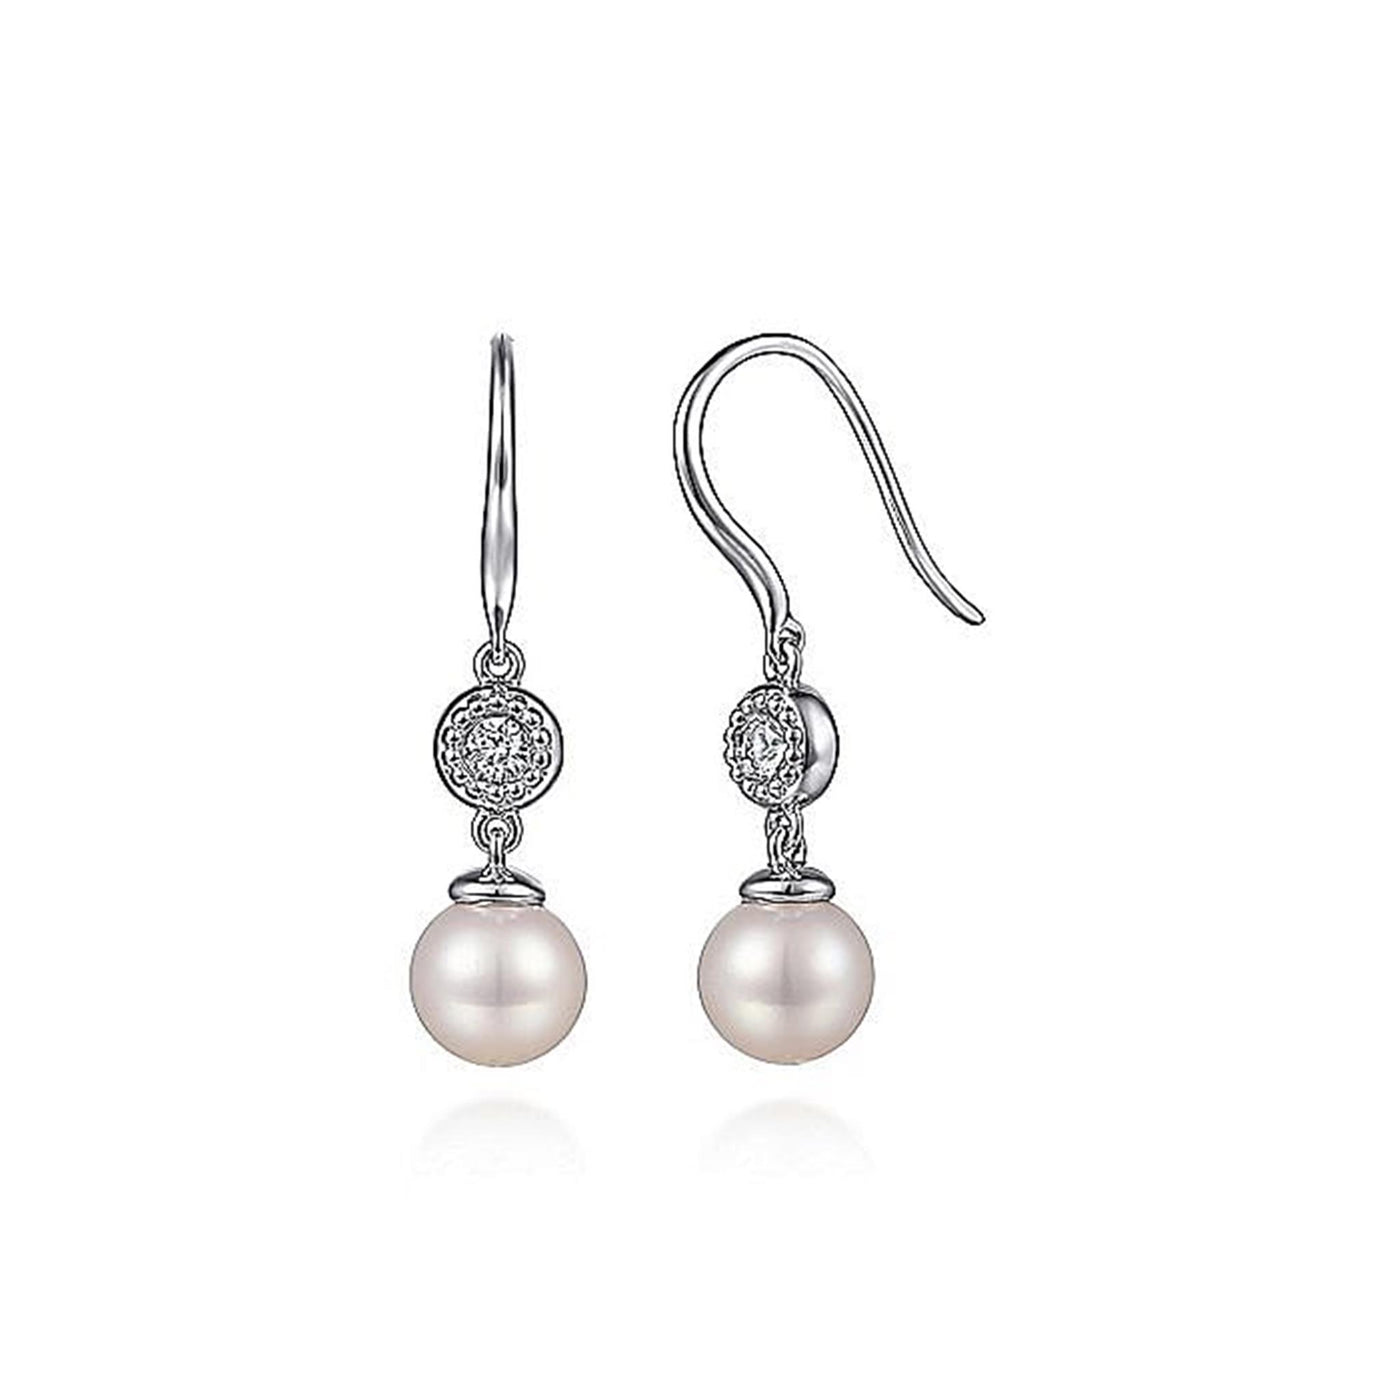 Gabriel Sterling Silver 1.74ctw Drop Style Earrings Featuring Freshwater Pearls and Sapphires